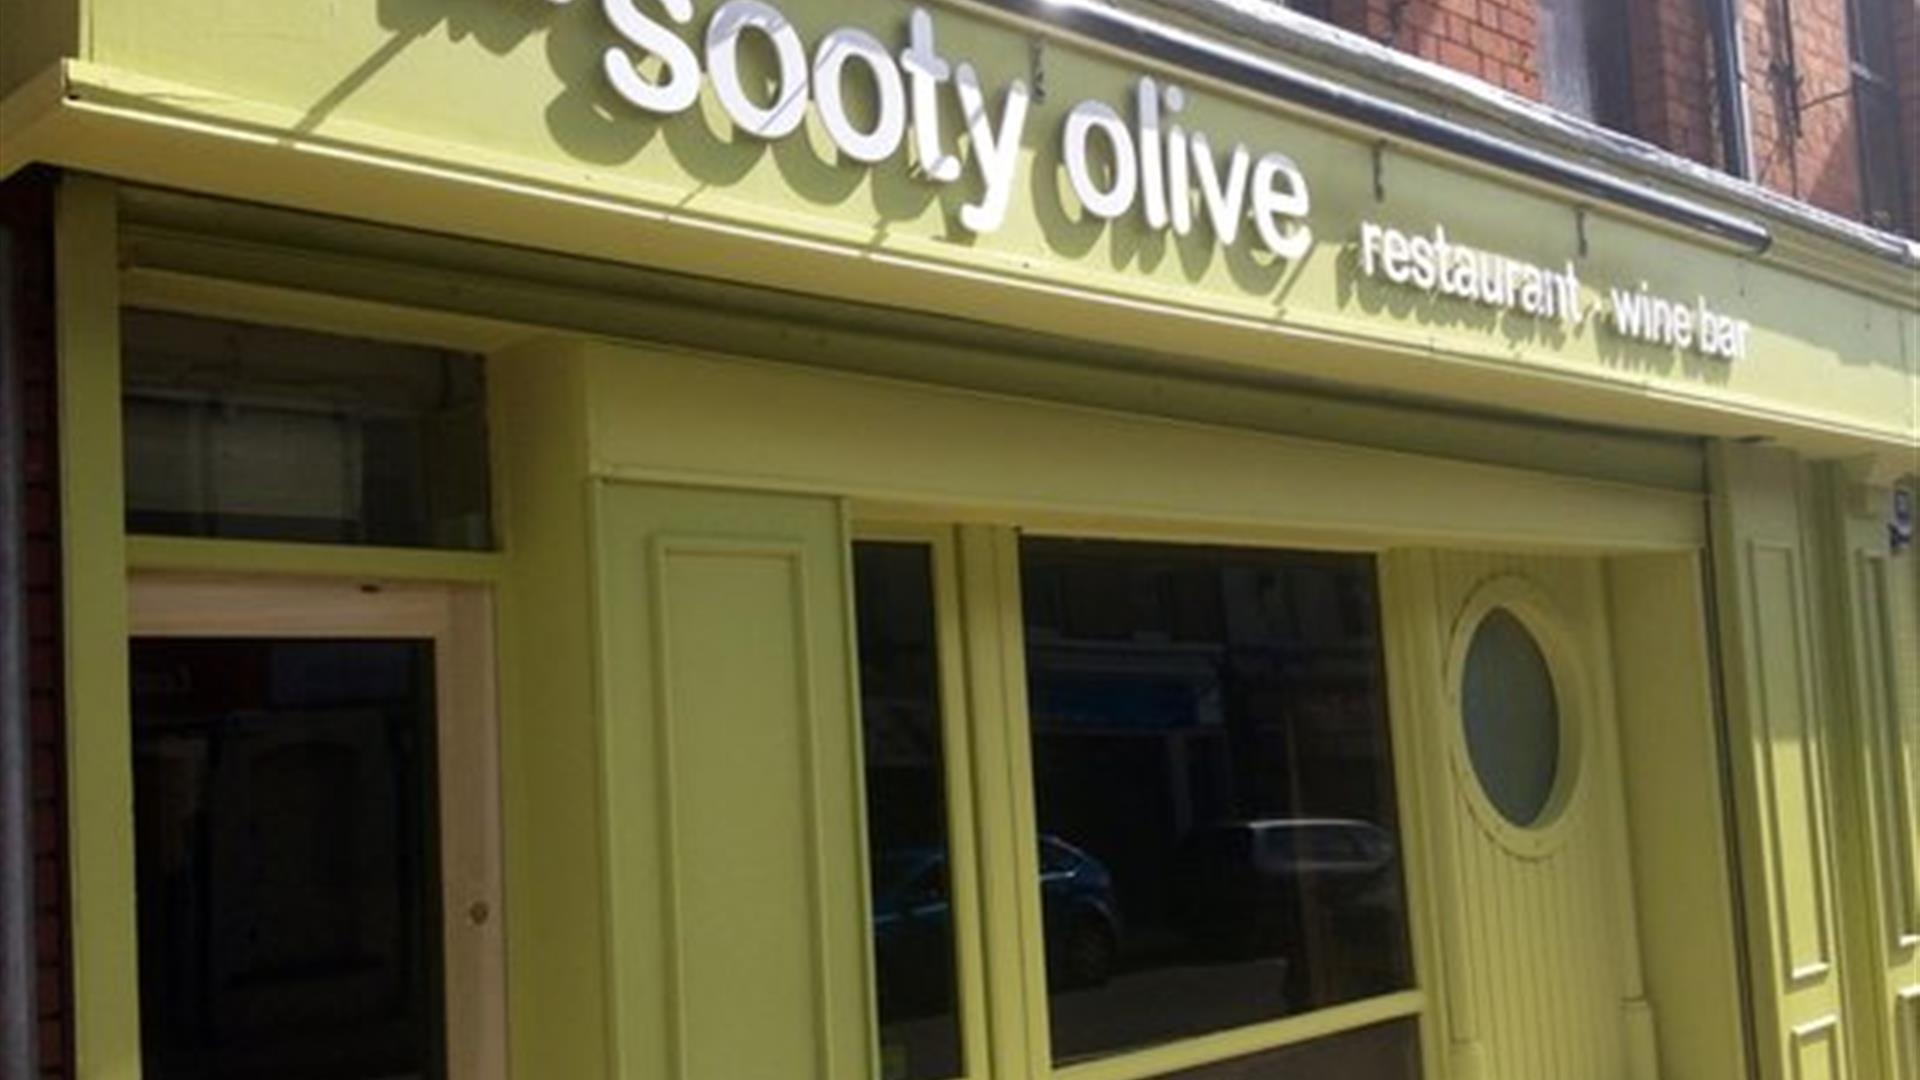 The Sooty Olive Restaurant and Winebar